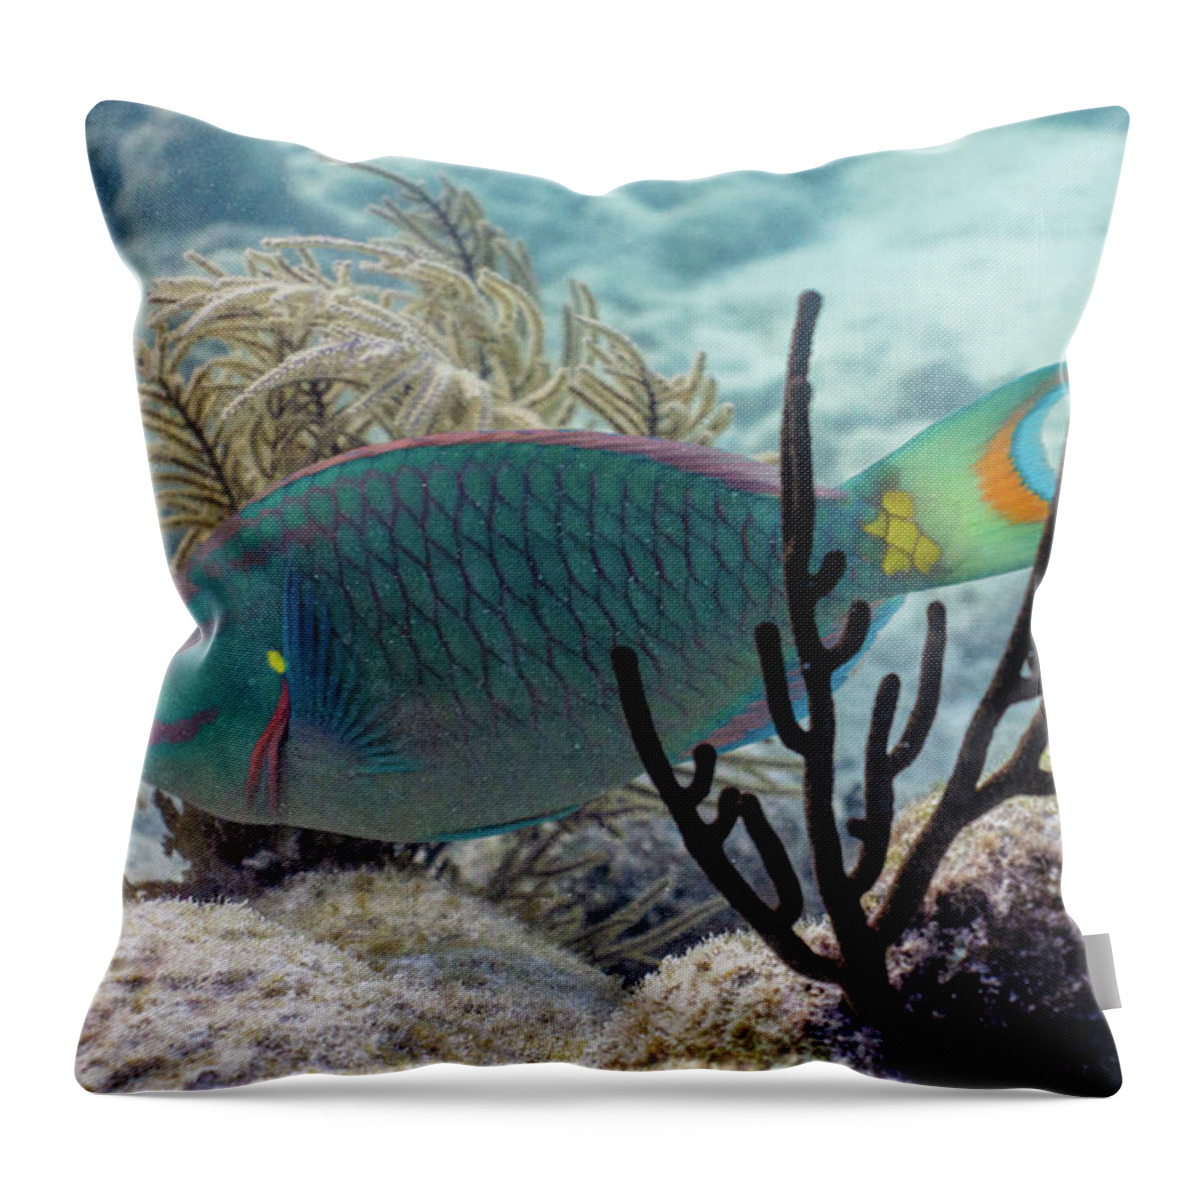 Stoplight Throw Pillow featuring the photograph In Between by Lynne Browne